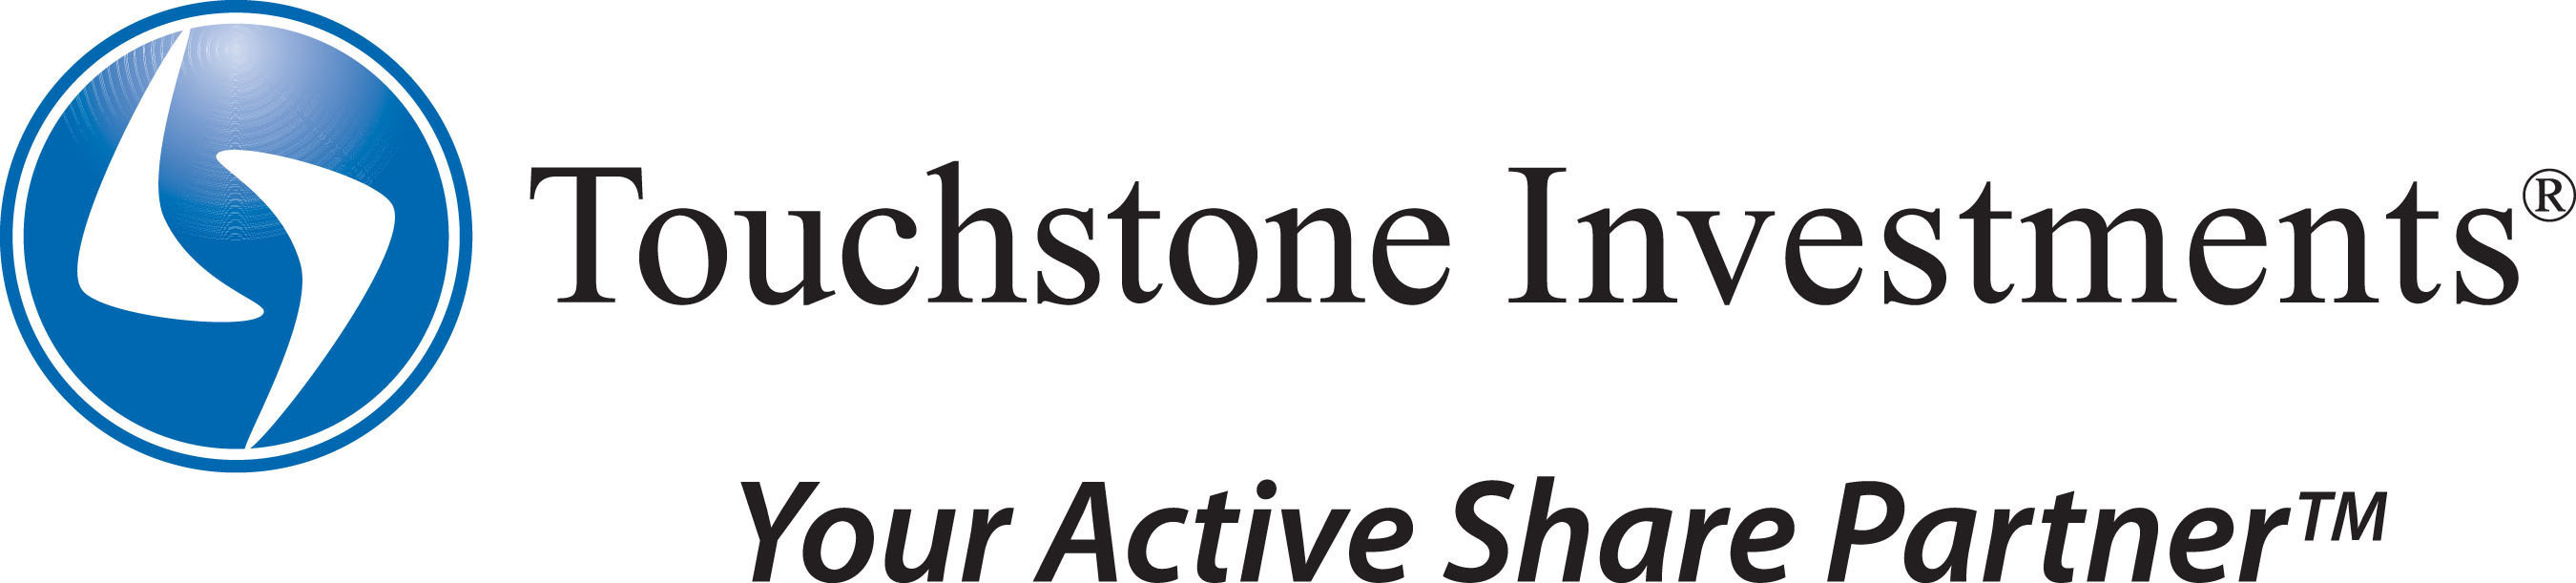 Touchstone Investments - Your Active Share Partner(TM)